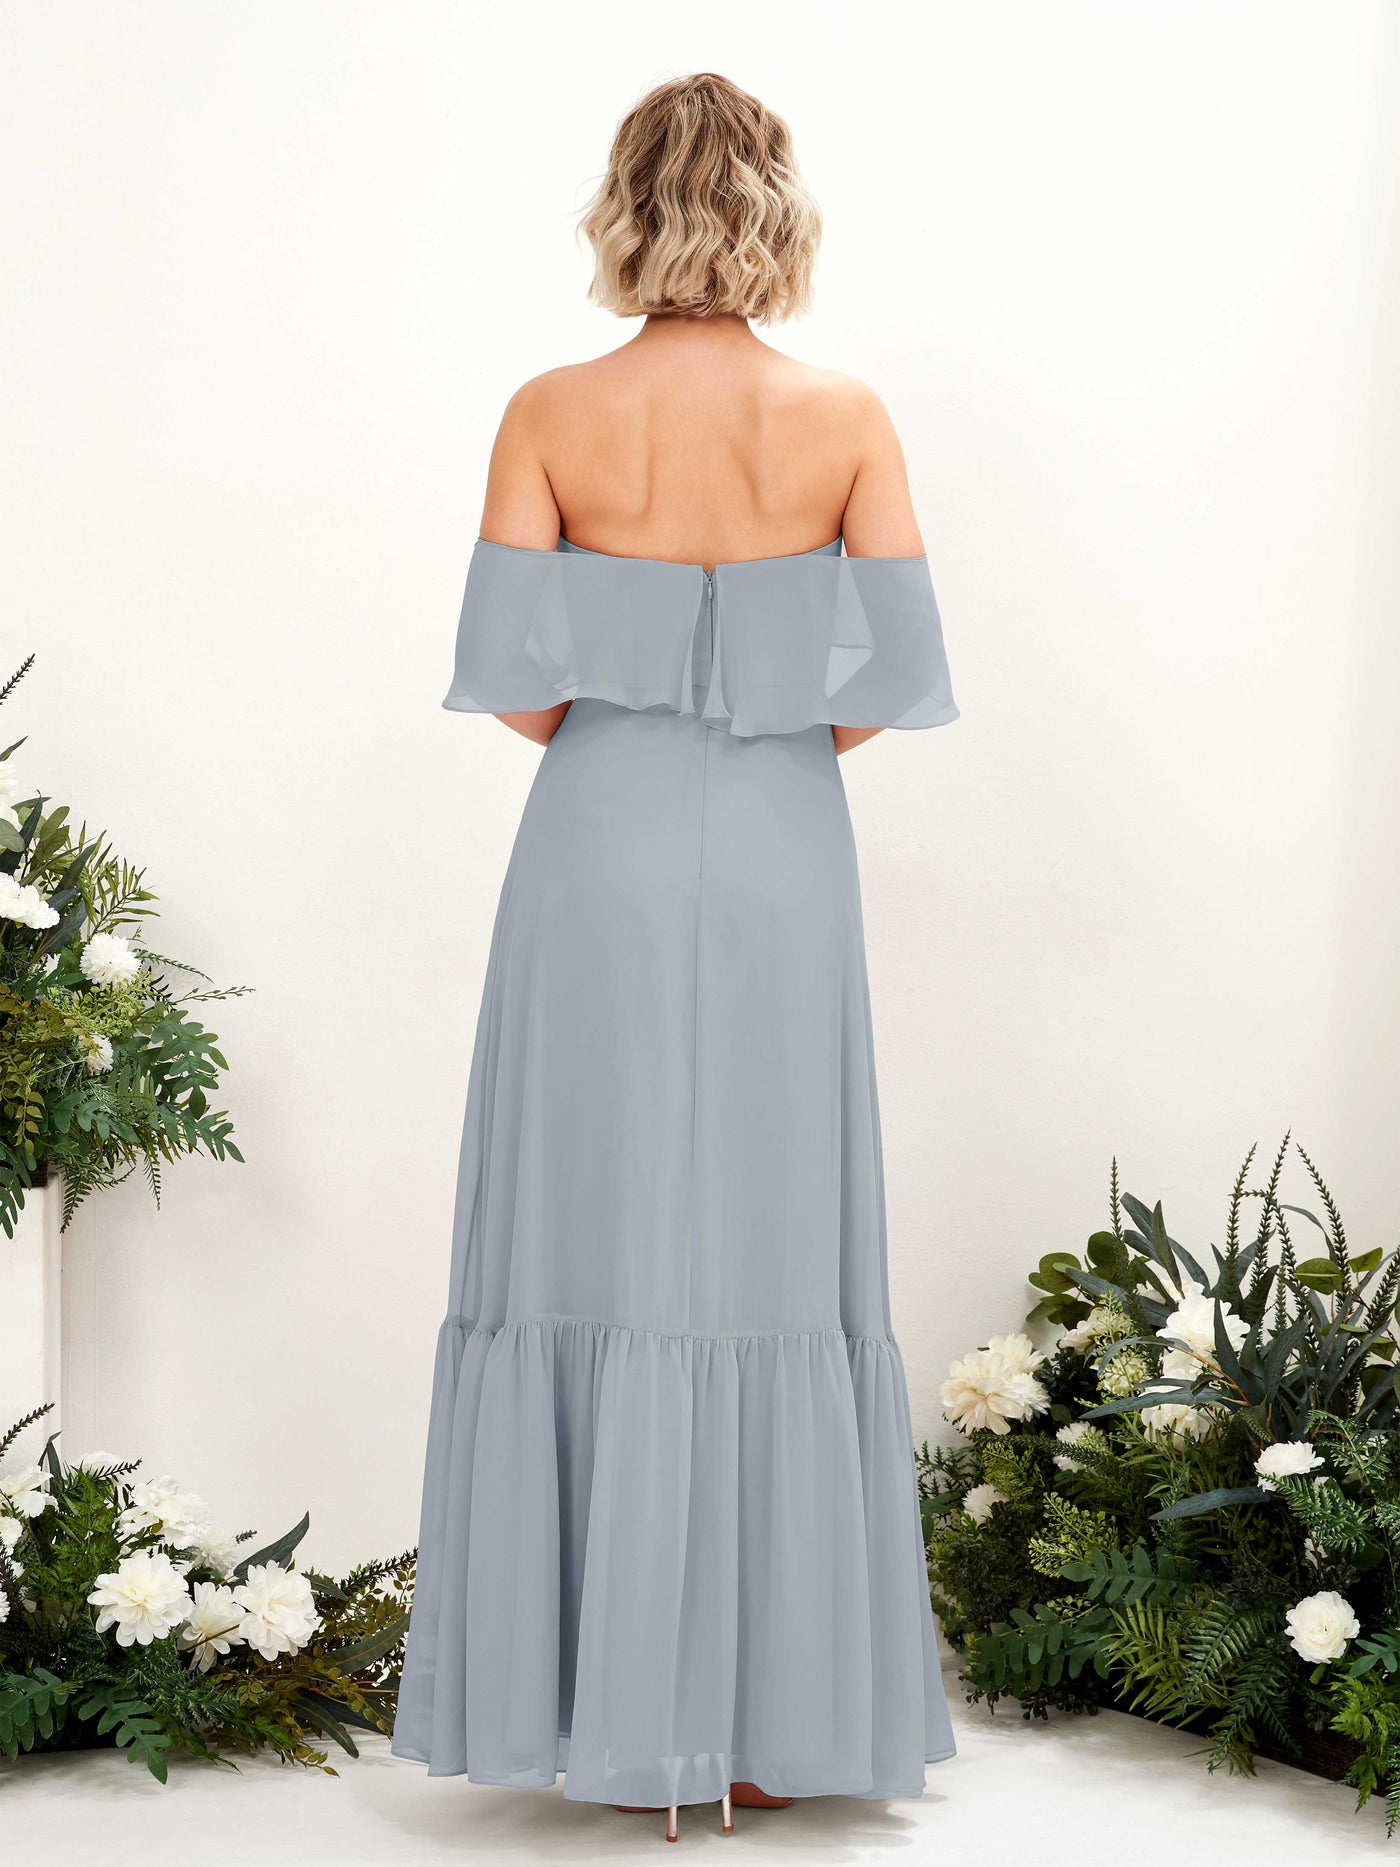 Dusty Blue-Upgrade Bridesmaid Dresses Bridesmaid Dress A-line Chiffon Off Shoulder Full Length Sleeveless Wedding Party Dress (81224504)#color_dusty-blue-upgrade